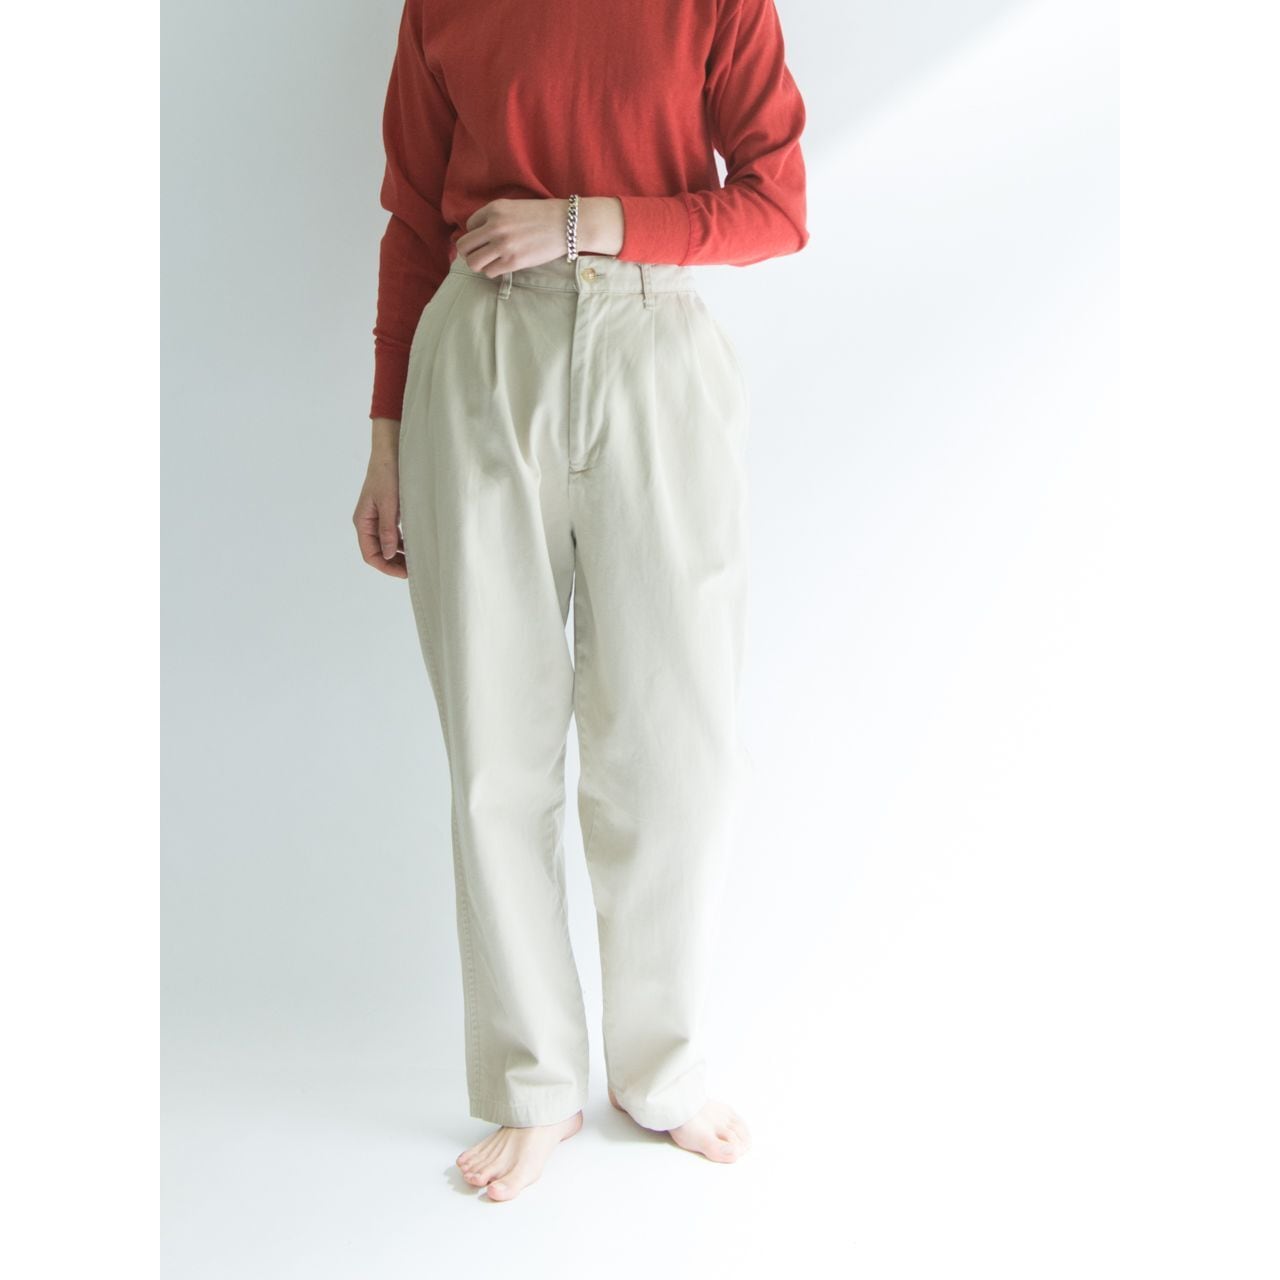 Ralph Lauren】Made in U.S.A. 2tuck wide chino pants（ラルフ